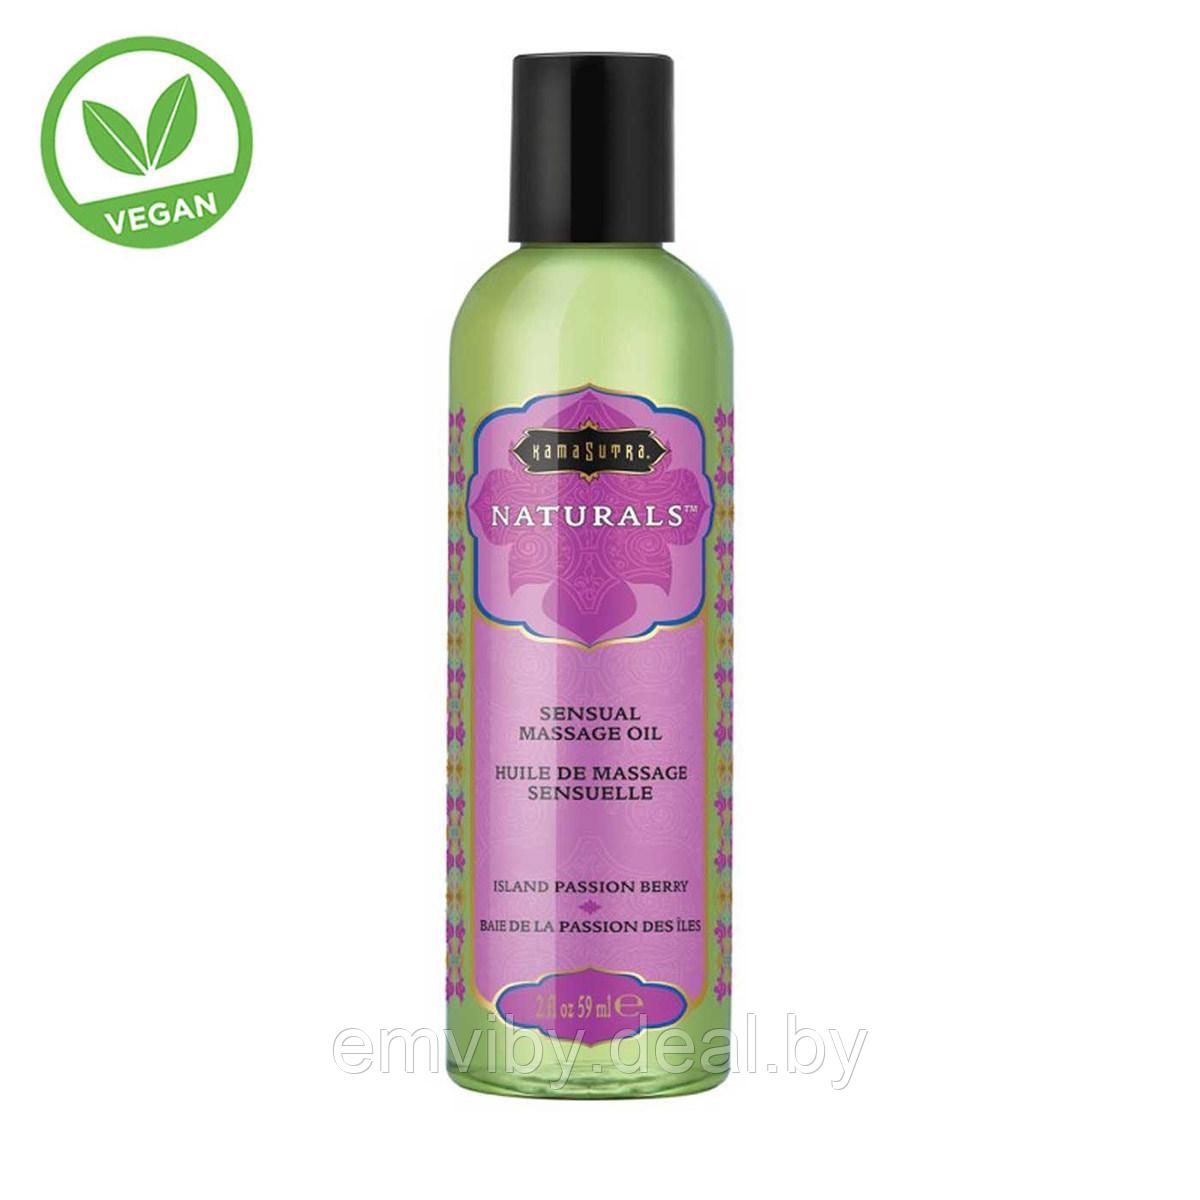 Массажное масло Naturals massage oil Island passion berry 59 мл - фото 1 - id-p225116593